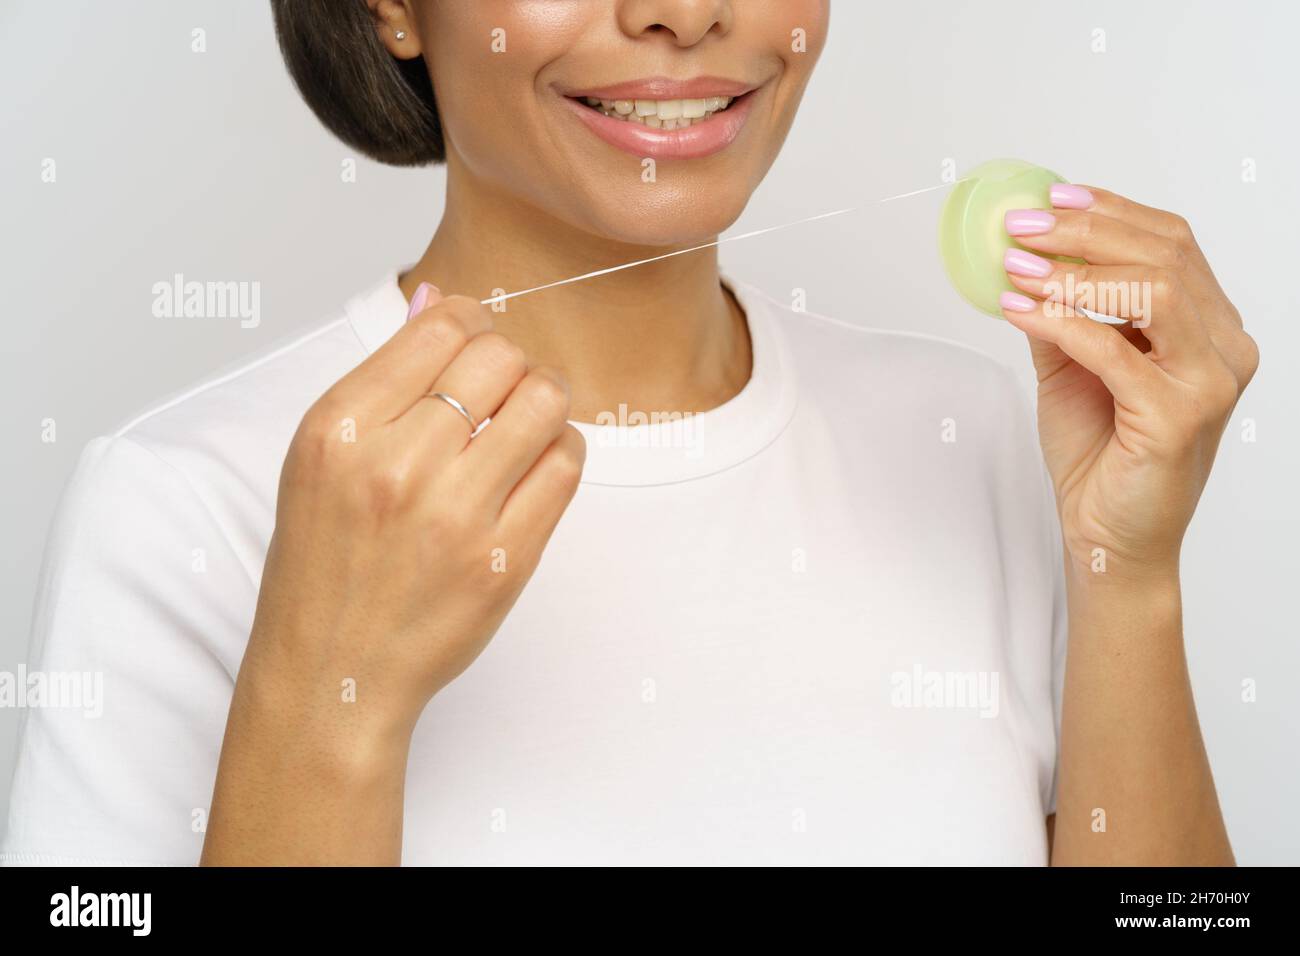 Female using tooth floss smile with healthy white teeth. Young woman flossing, doing morning routine Stock Photo